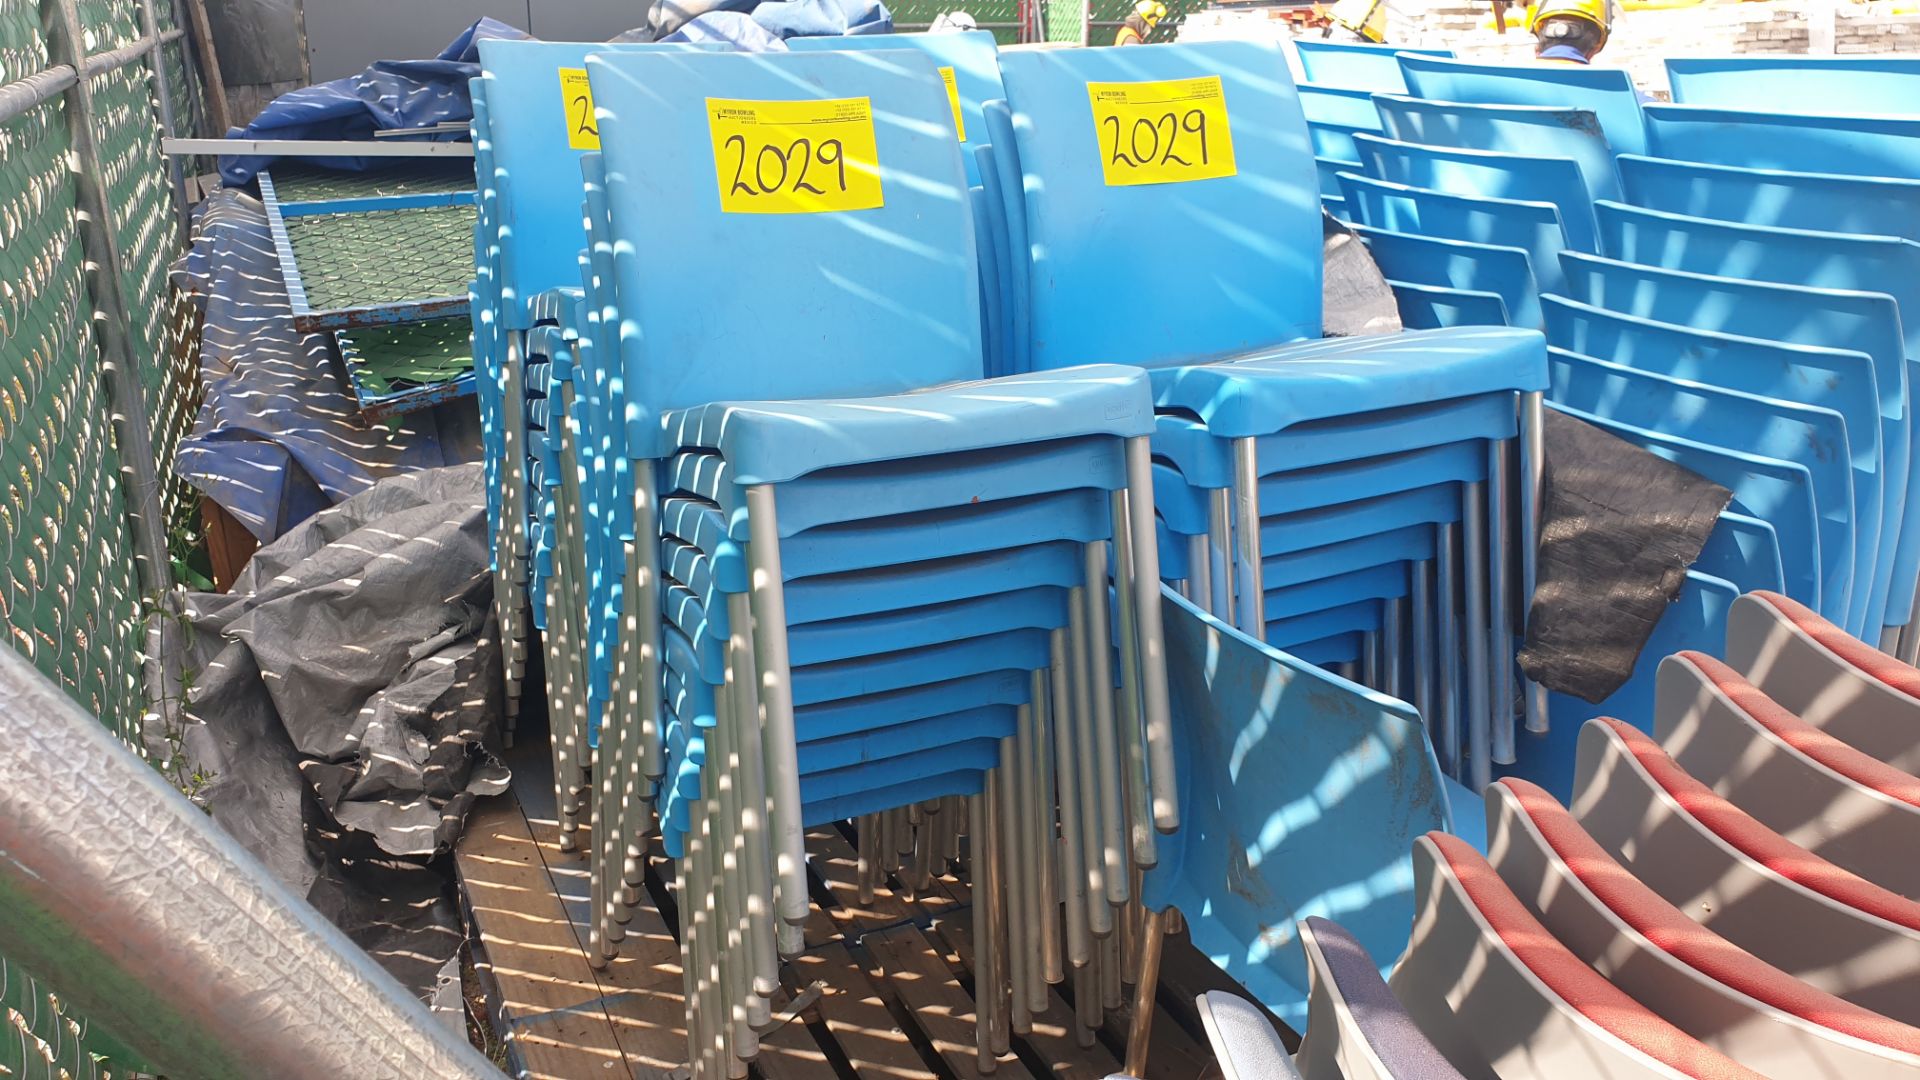 1 Lote of 40 blue plastic chairs, 7 metal chairs for office with backrest and upholstered seat - Bild 15 aus 22